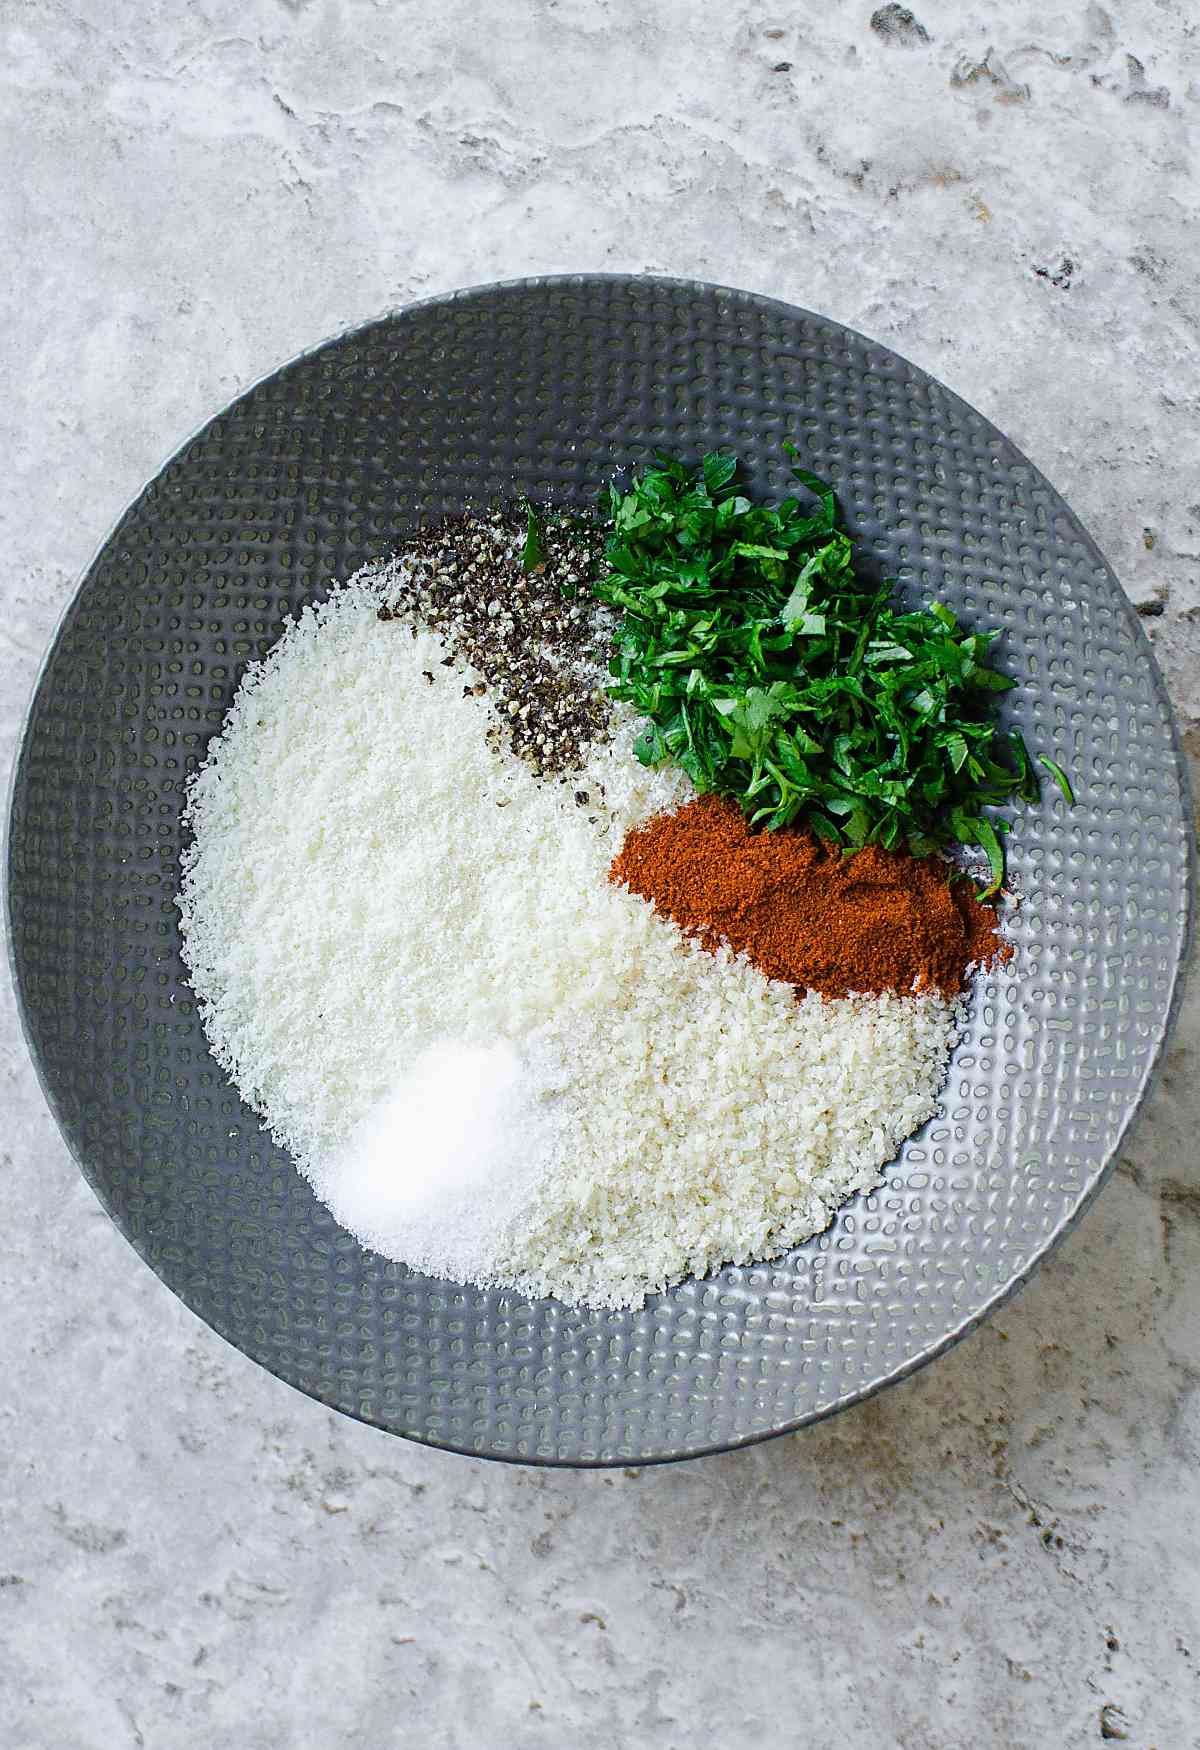 Parmesan cheese, bread crumbs, herbs and spices in a small mixing bowl.